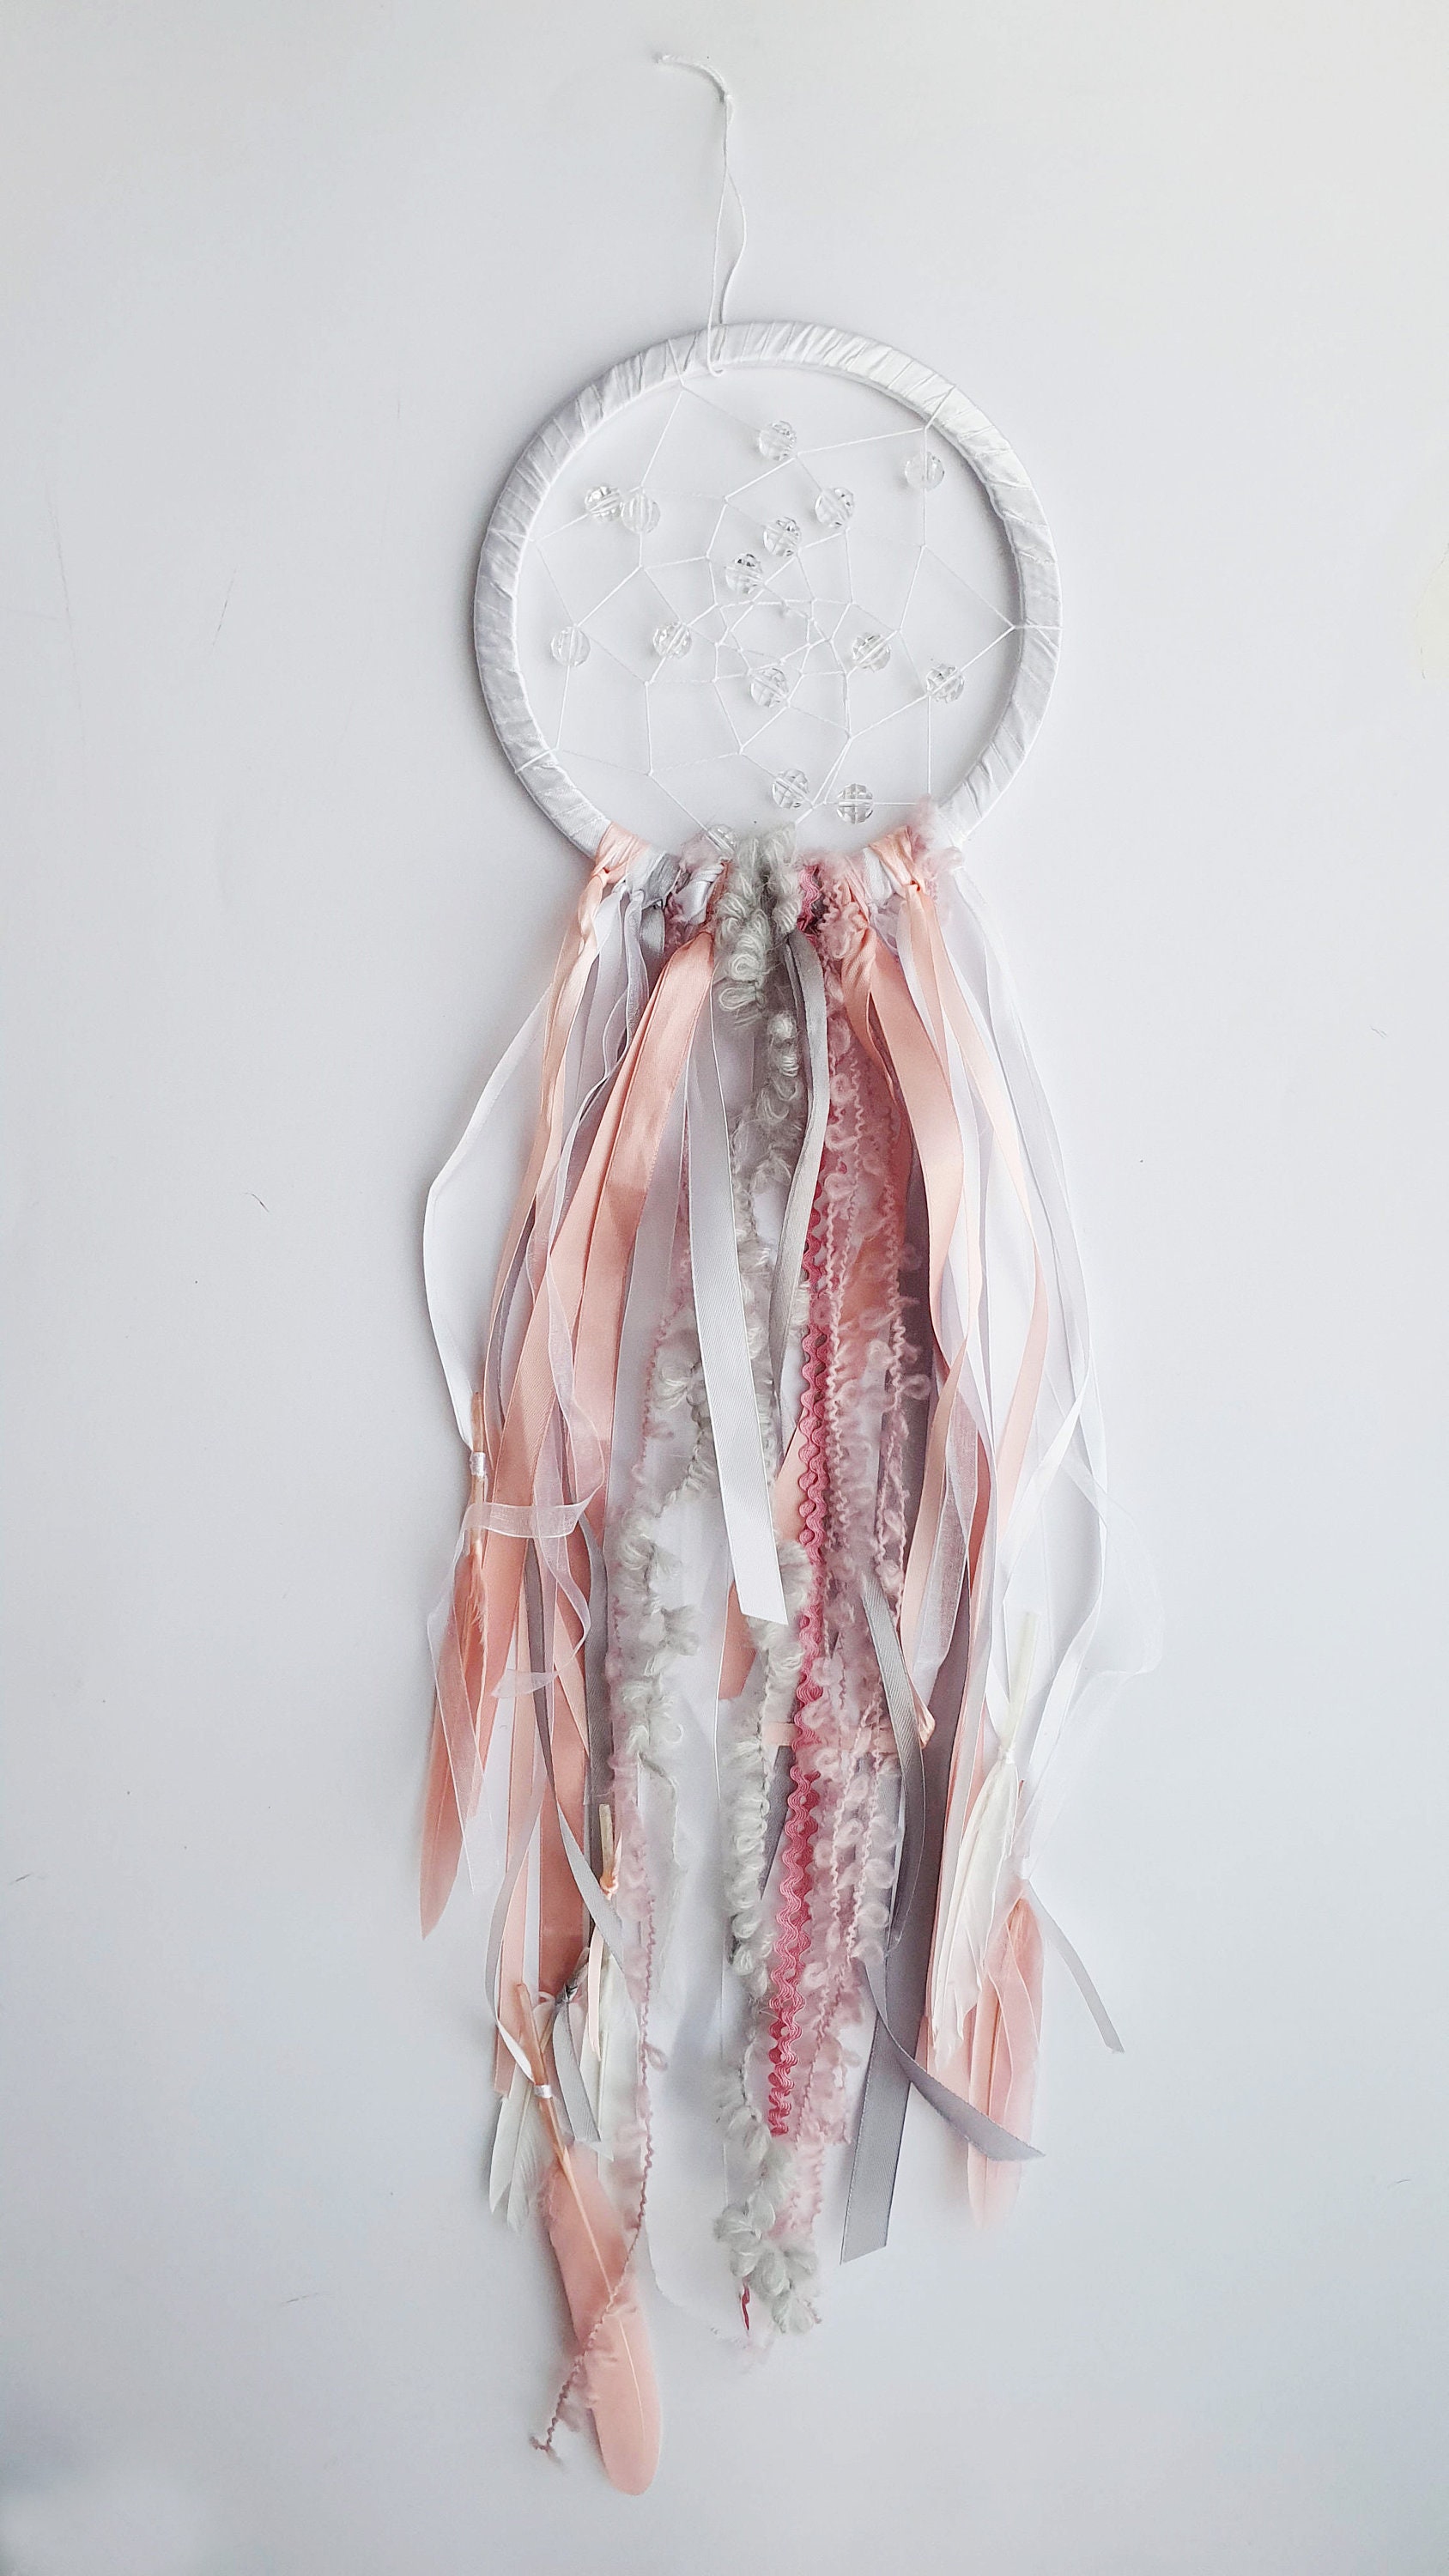 Dream Catcher Kit for Adults, Teens and Tweens to Make Your Own